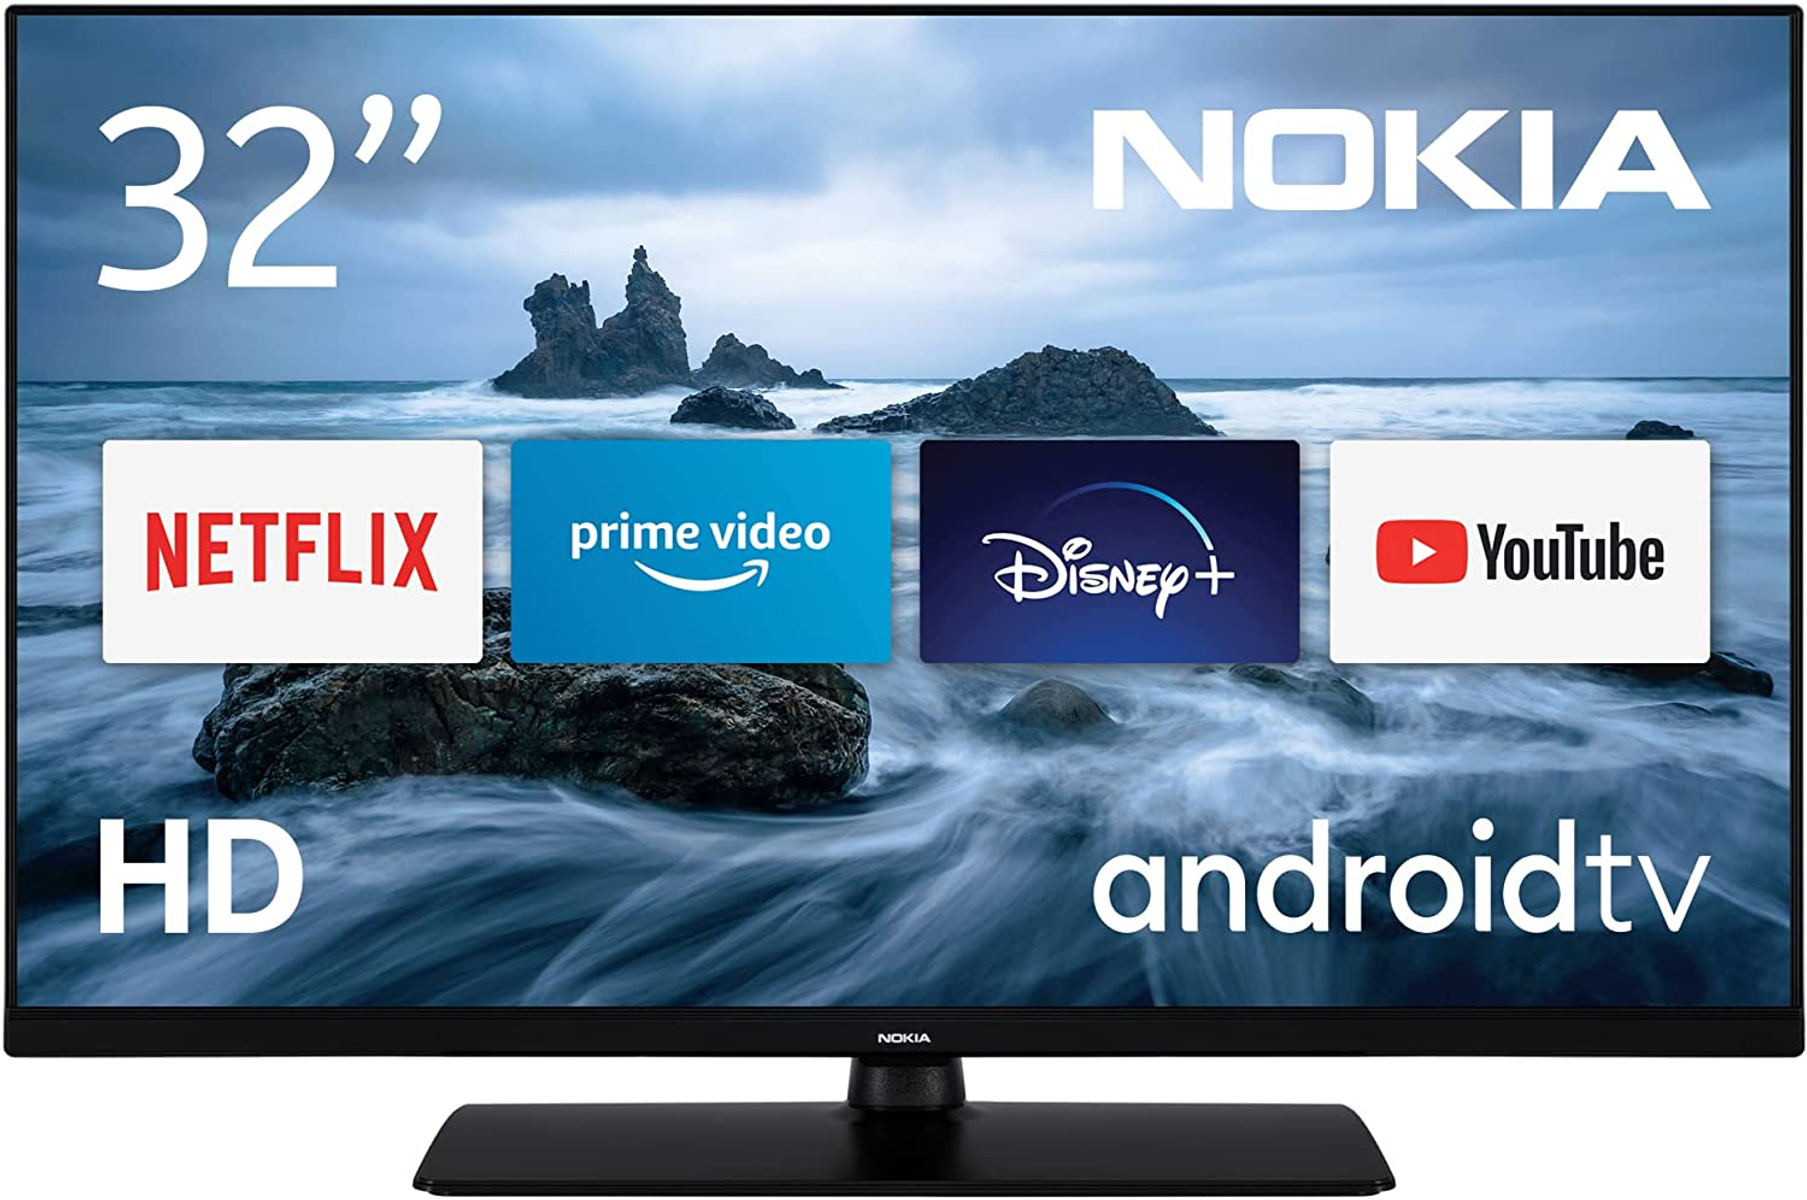 NOKIA (Flat, cm, Android) 81,28 HD, TV HNE32GV210 LED 32 Zoll /